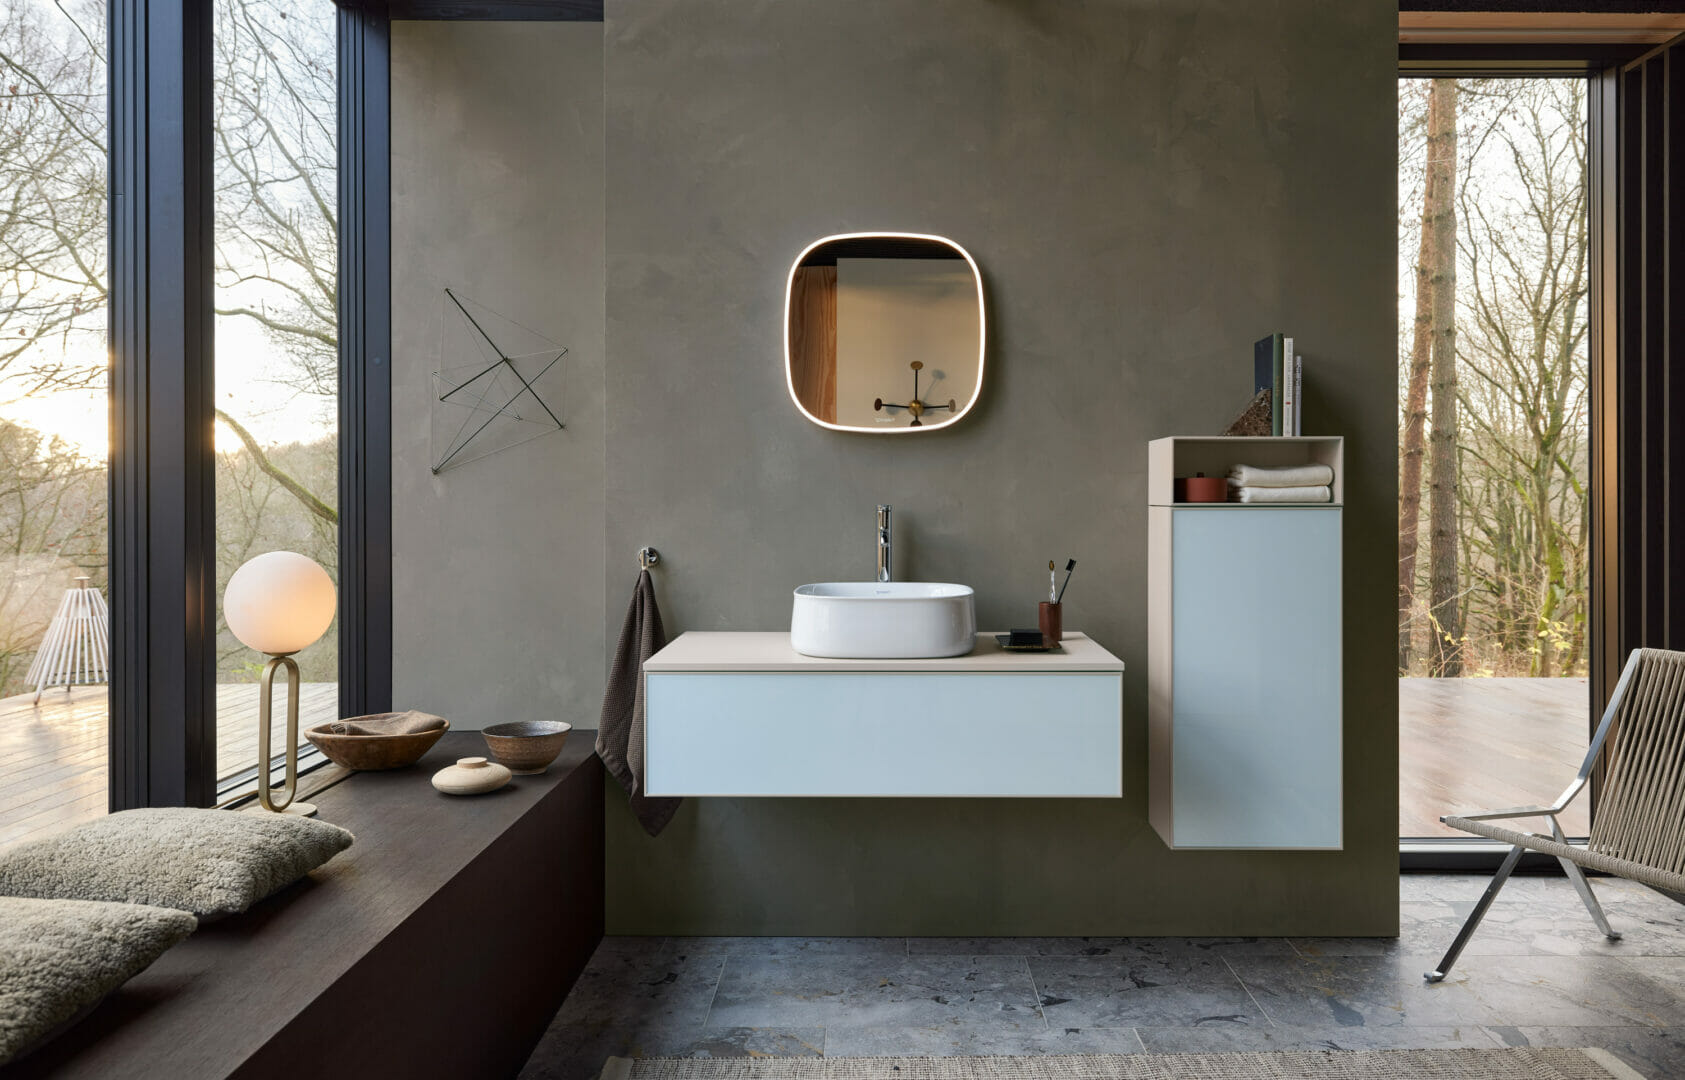 Bathroom trends: The bathroom as a living area and relaxing feel-good room